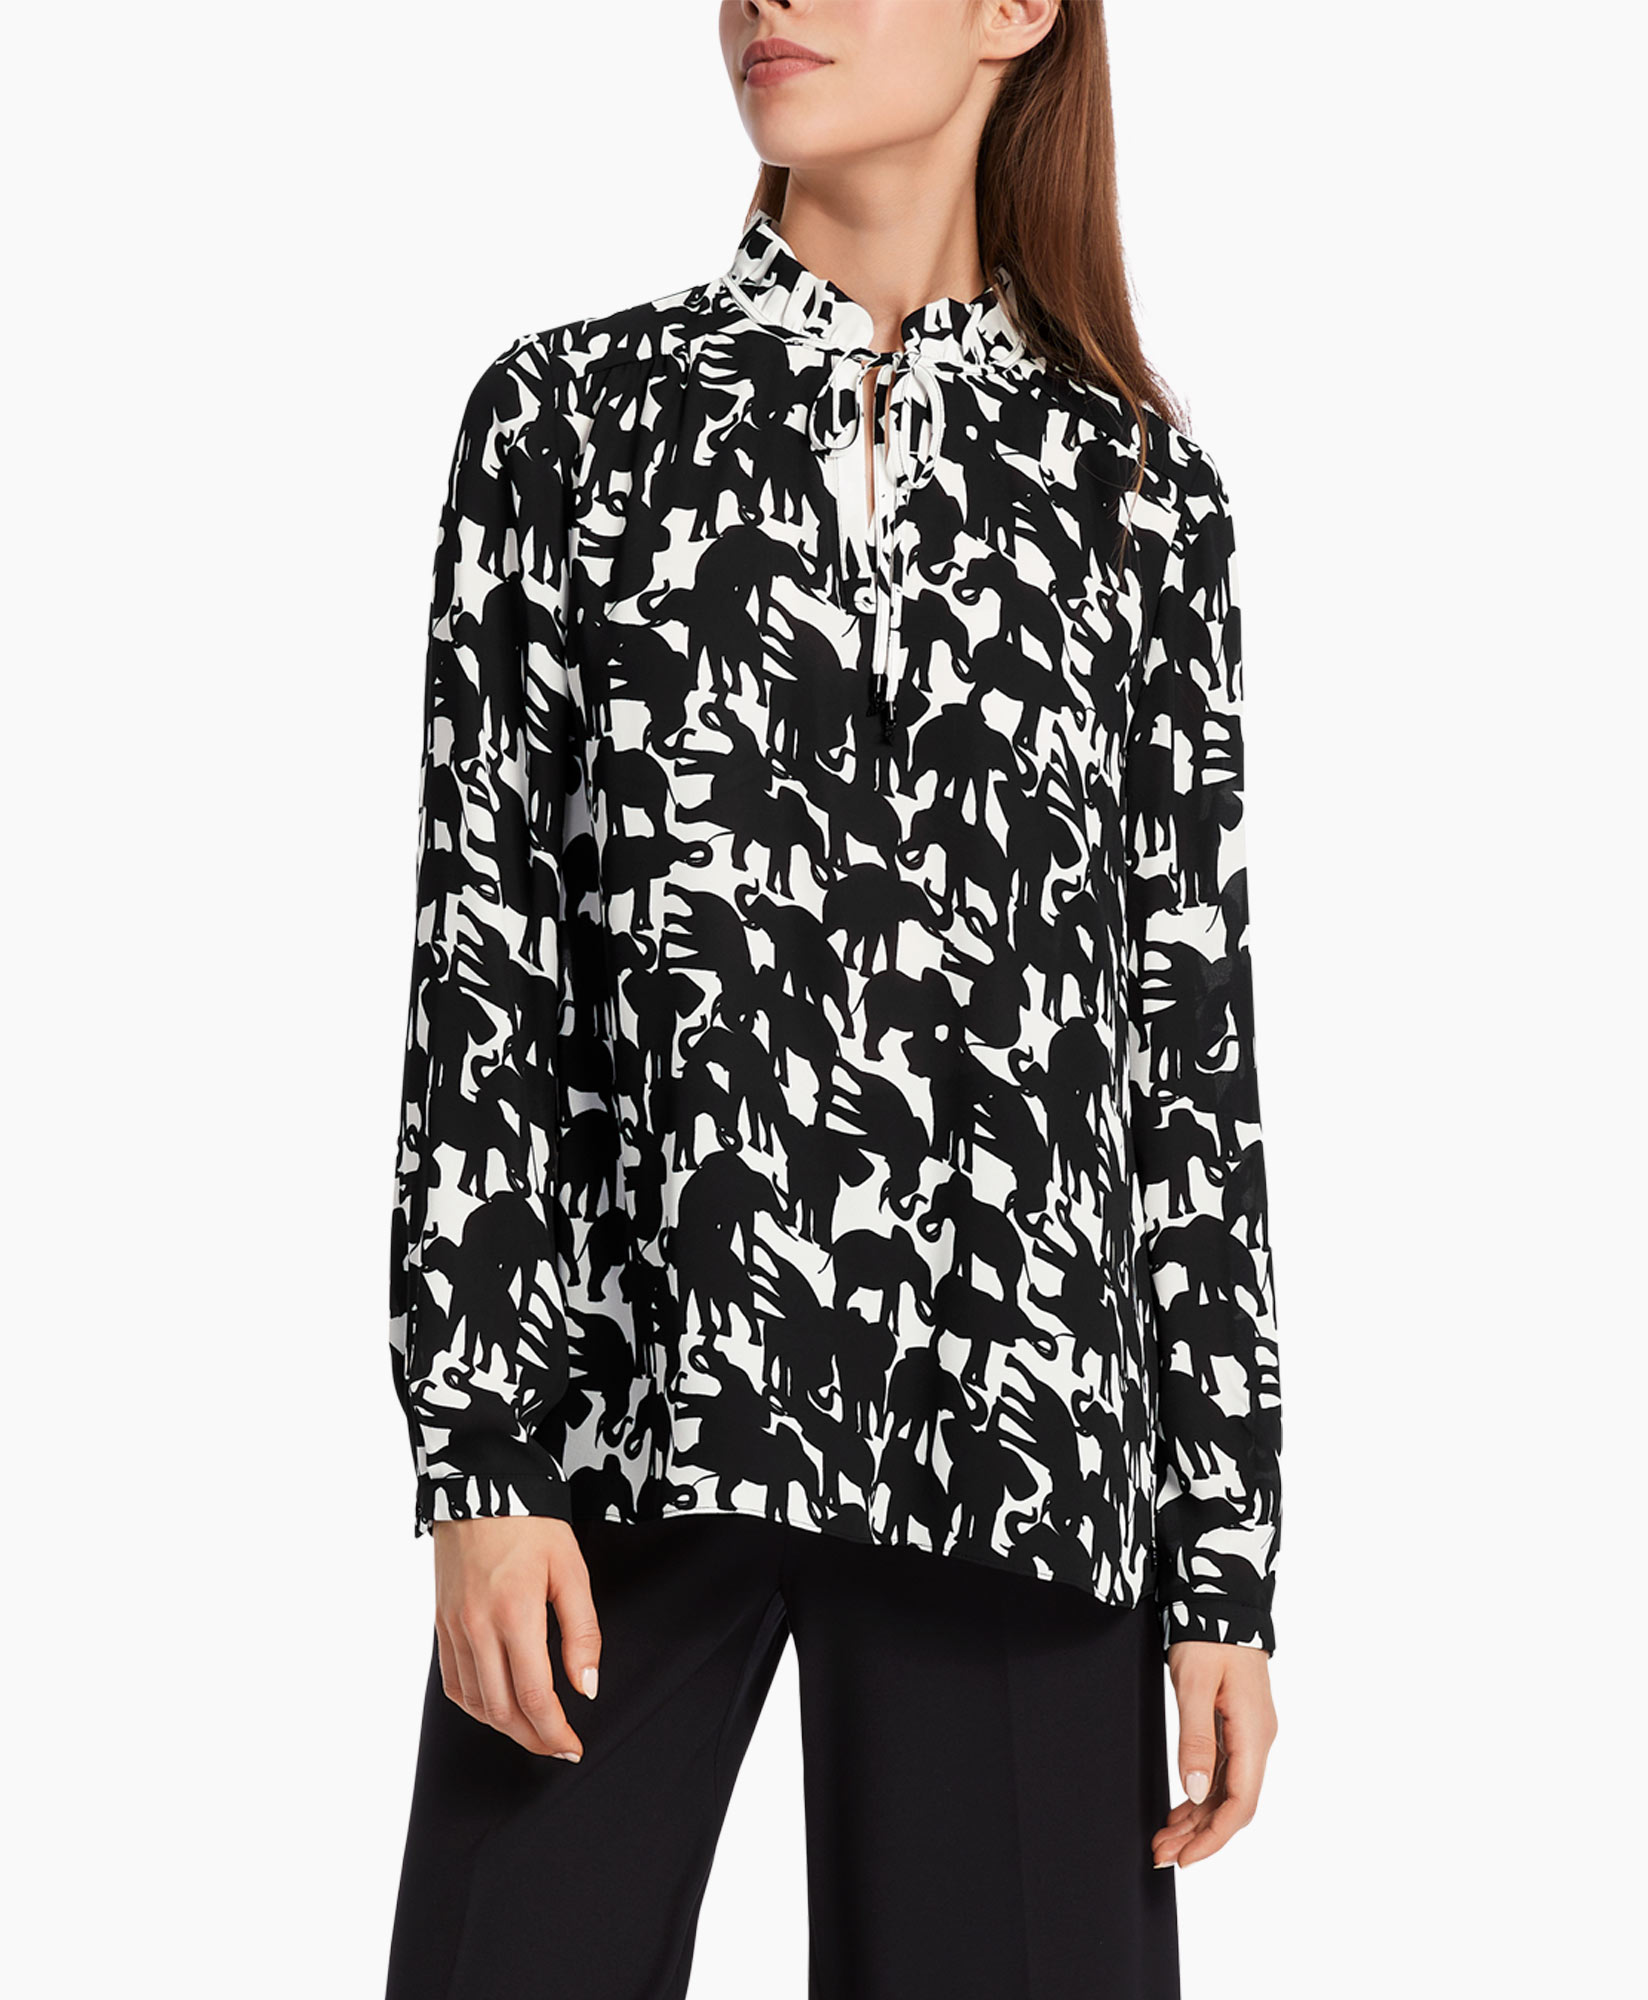 Marccain Collectie Blouse Wc 51.16 W13 Zwart